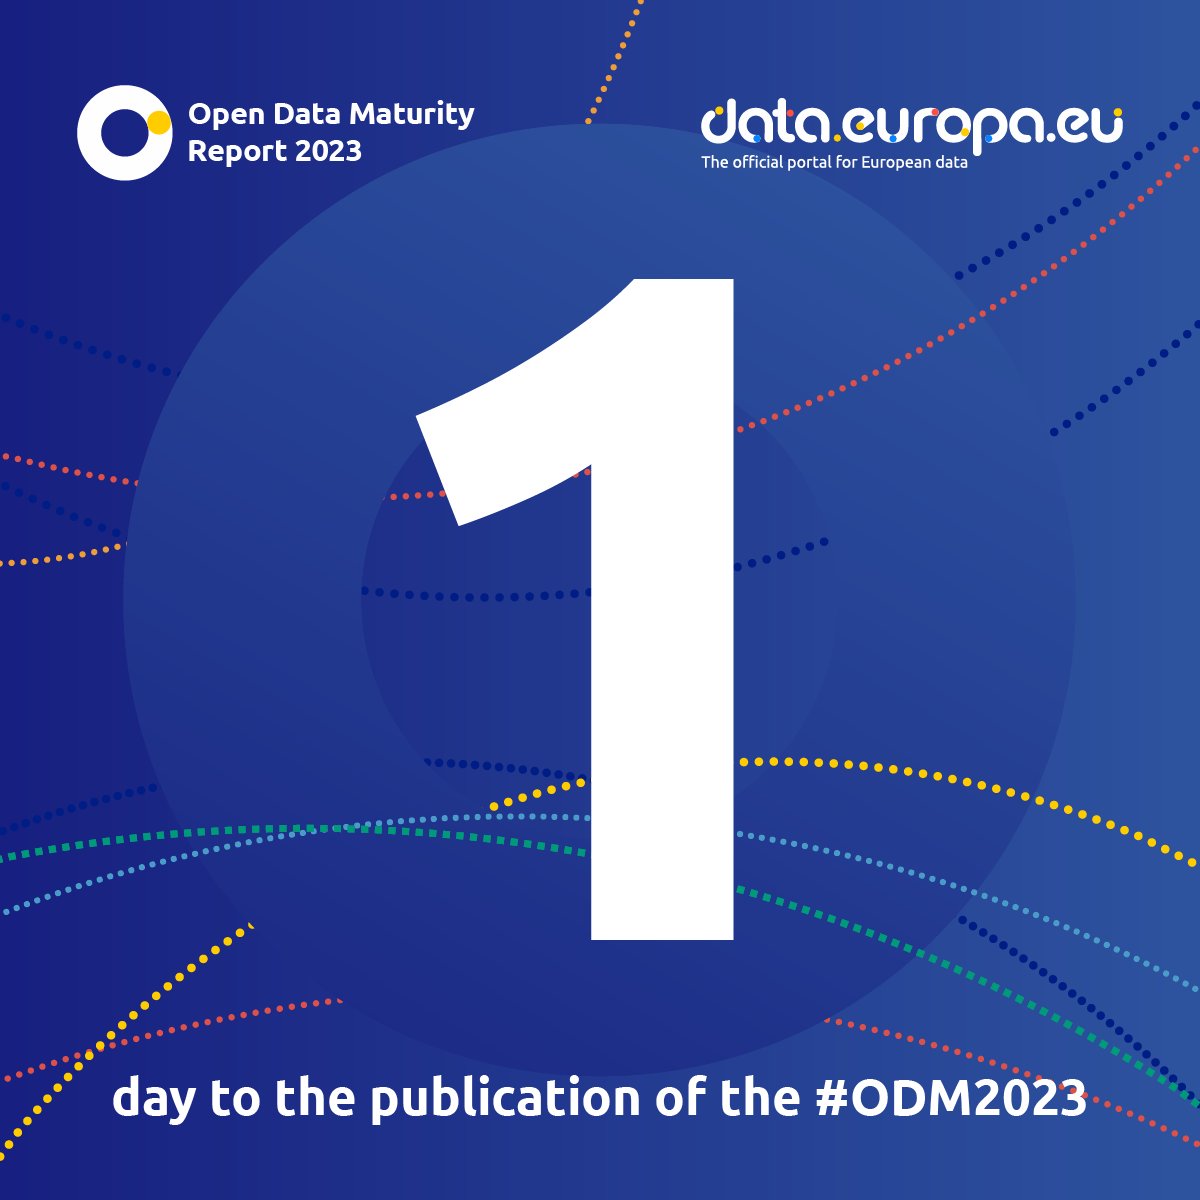 The amount and quality of #EUOpenData has continued to improve. Curious to know how countries are progressing in 2023? Explore the latest insights and trends in the 2023 Open Data Maturity report, coming in 24 hours!  

#OpenDataMaturity #ODM2023